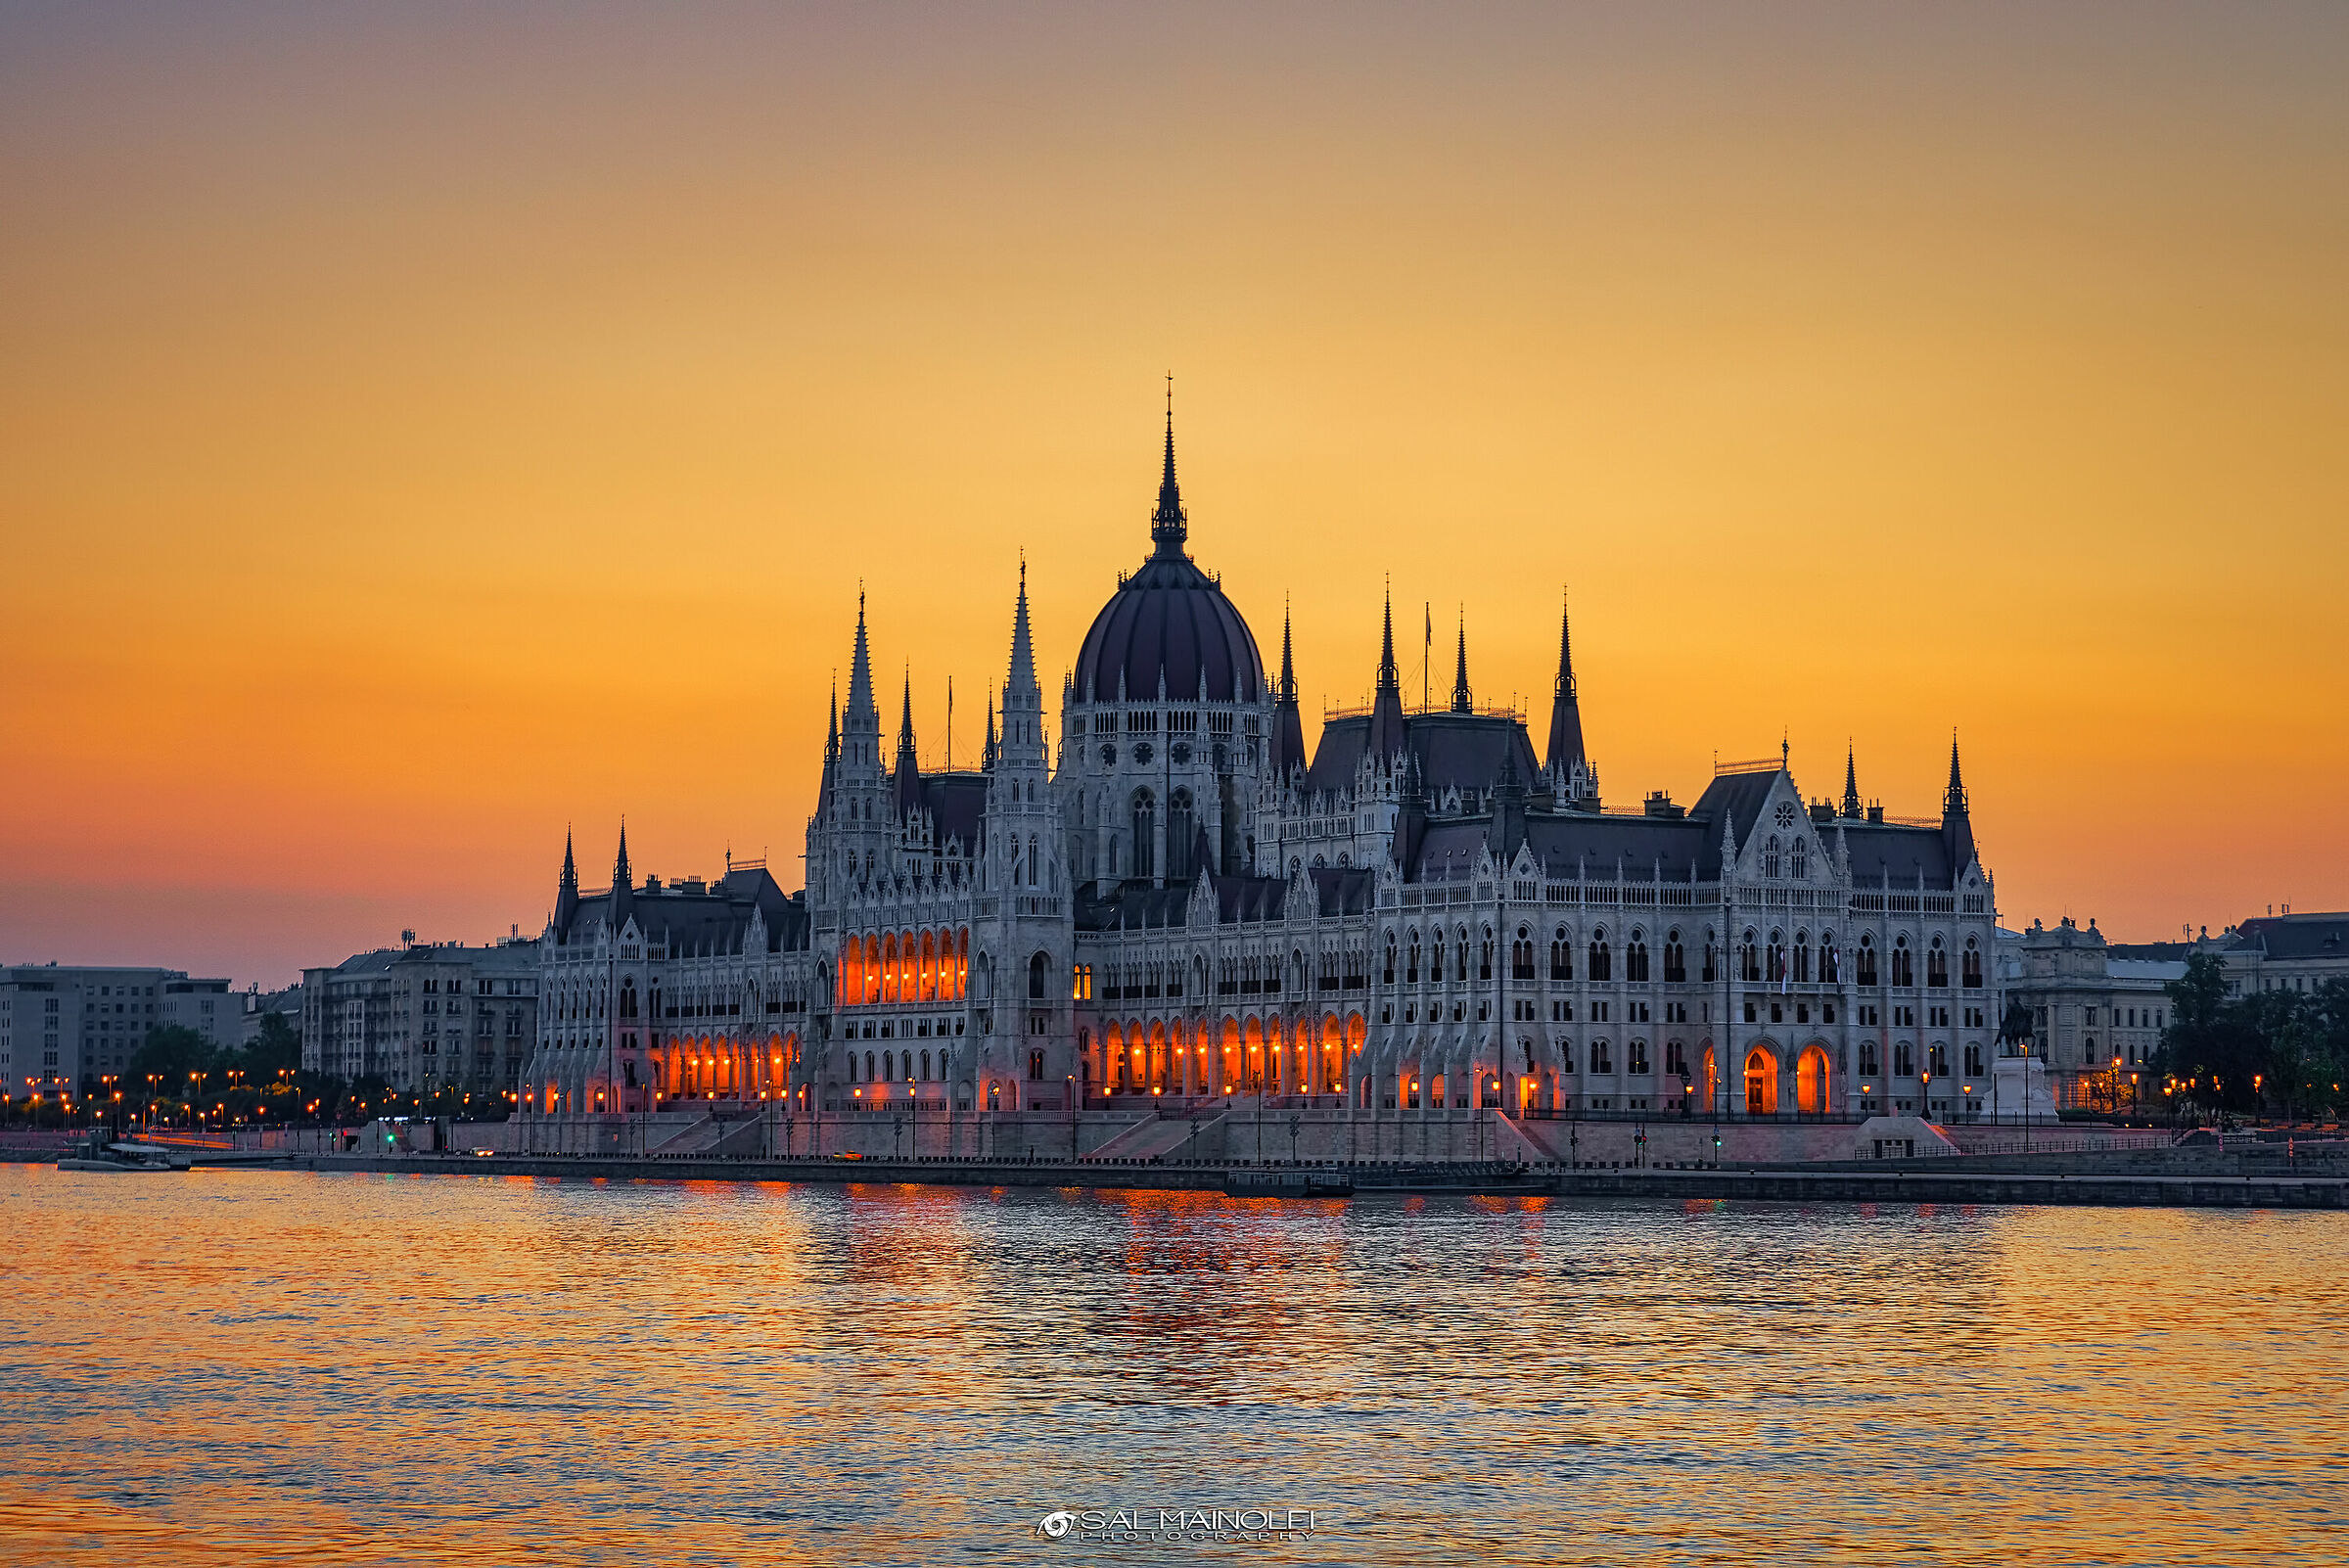 The Hungarian Parliament...